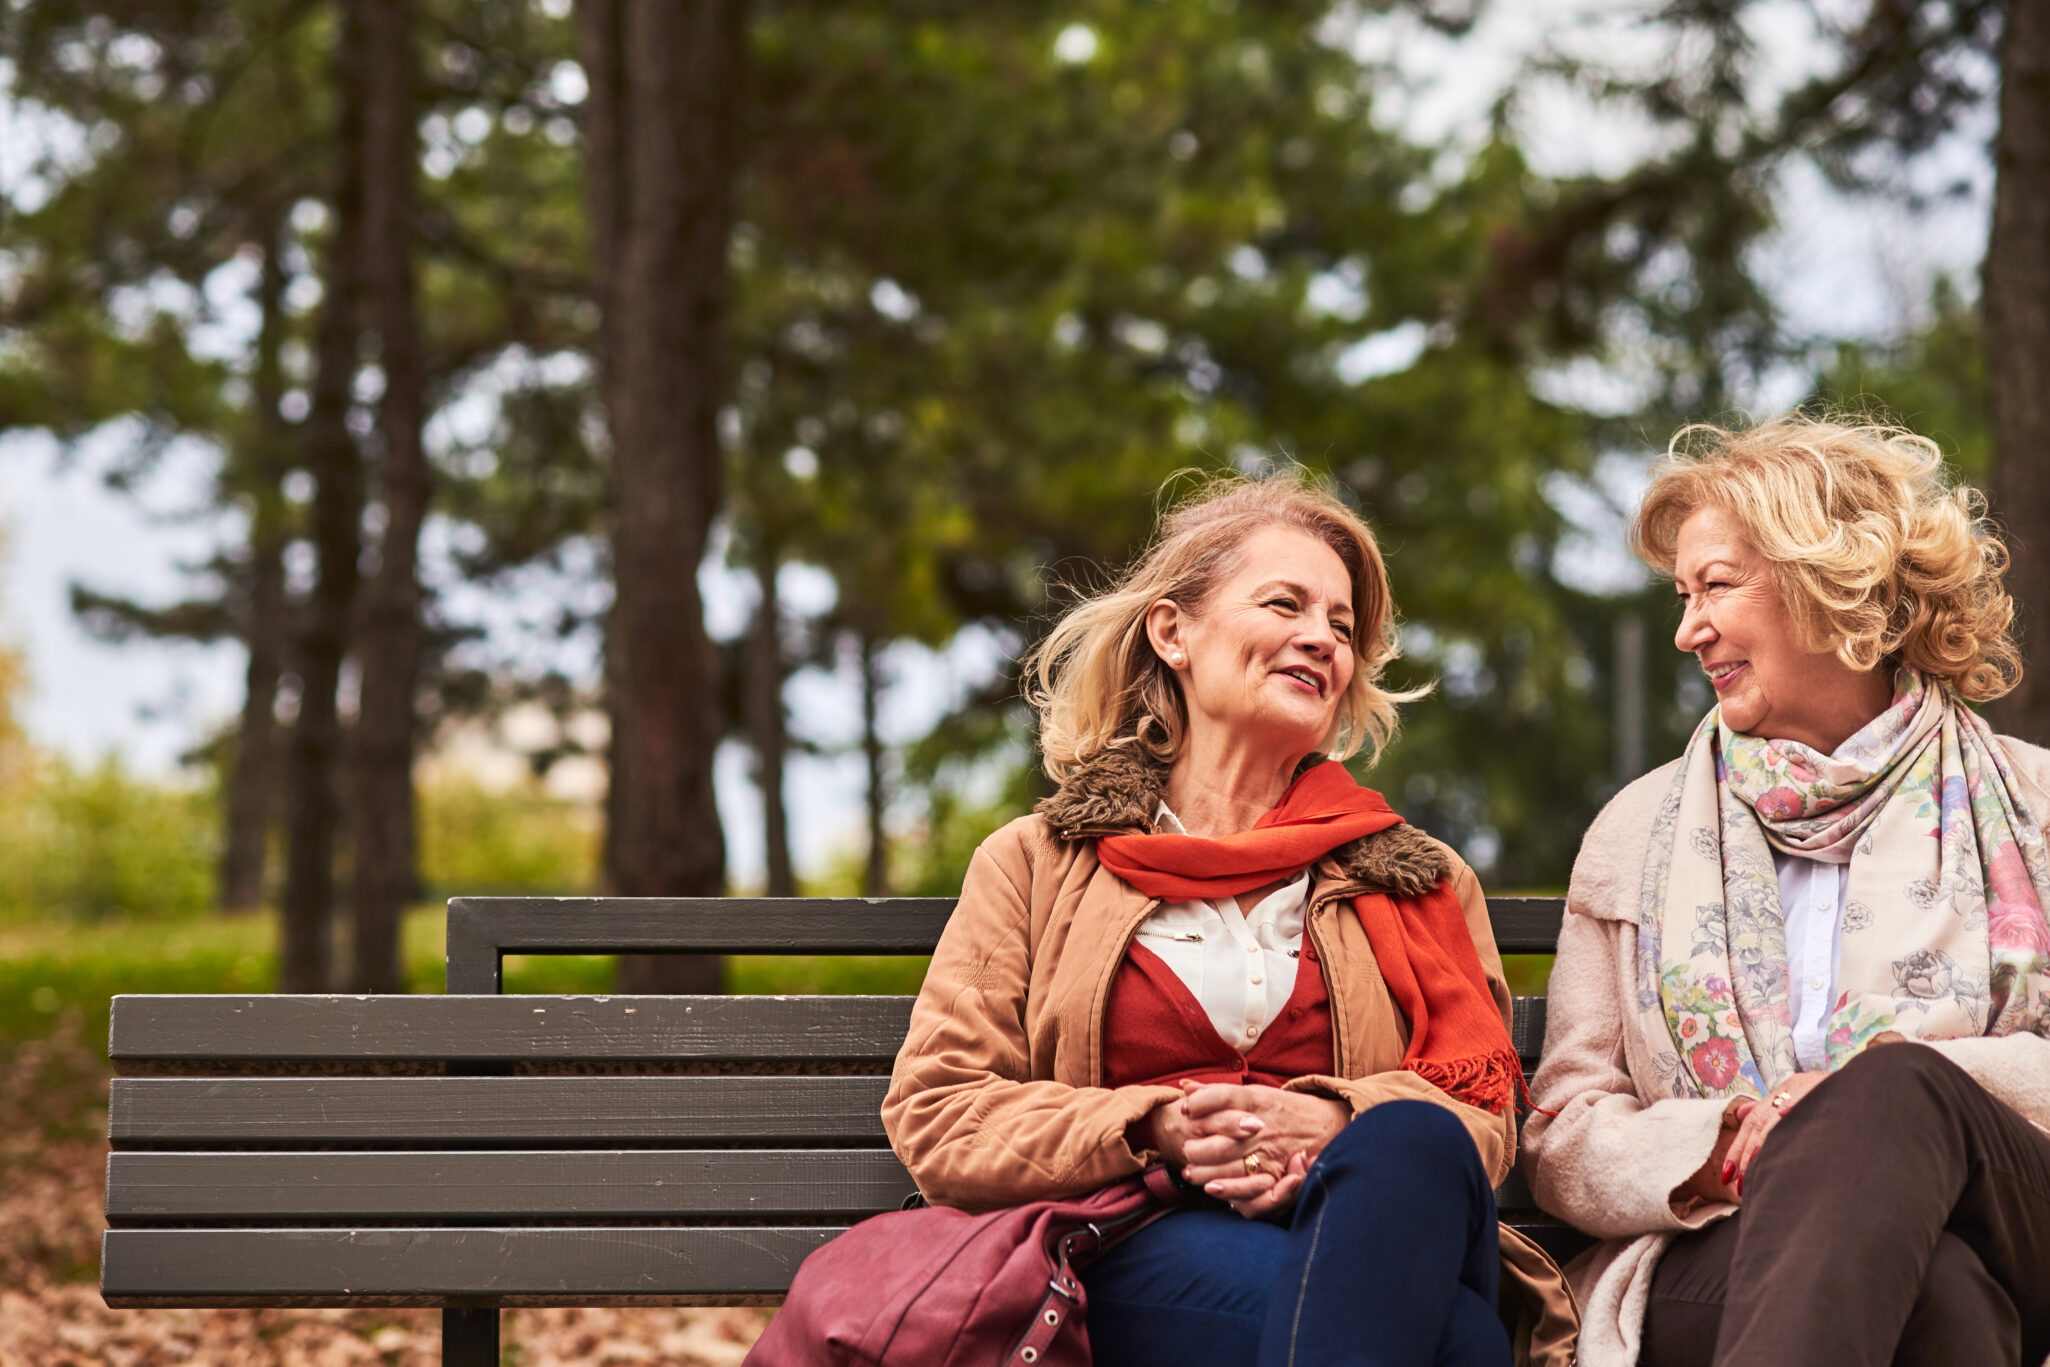 Two older women sit on a park bench and talk together